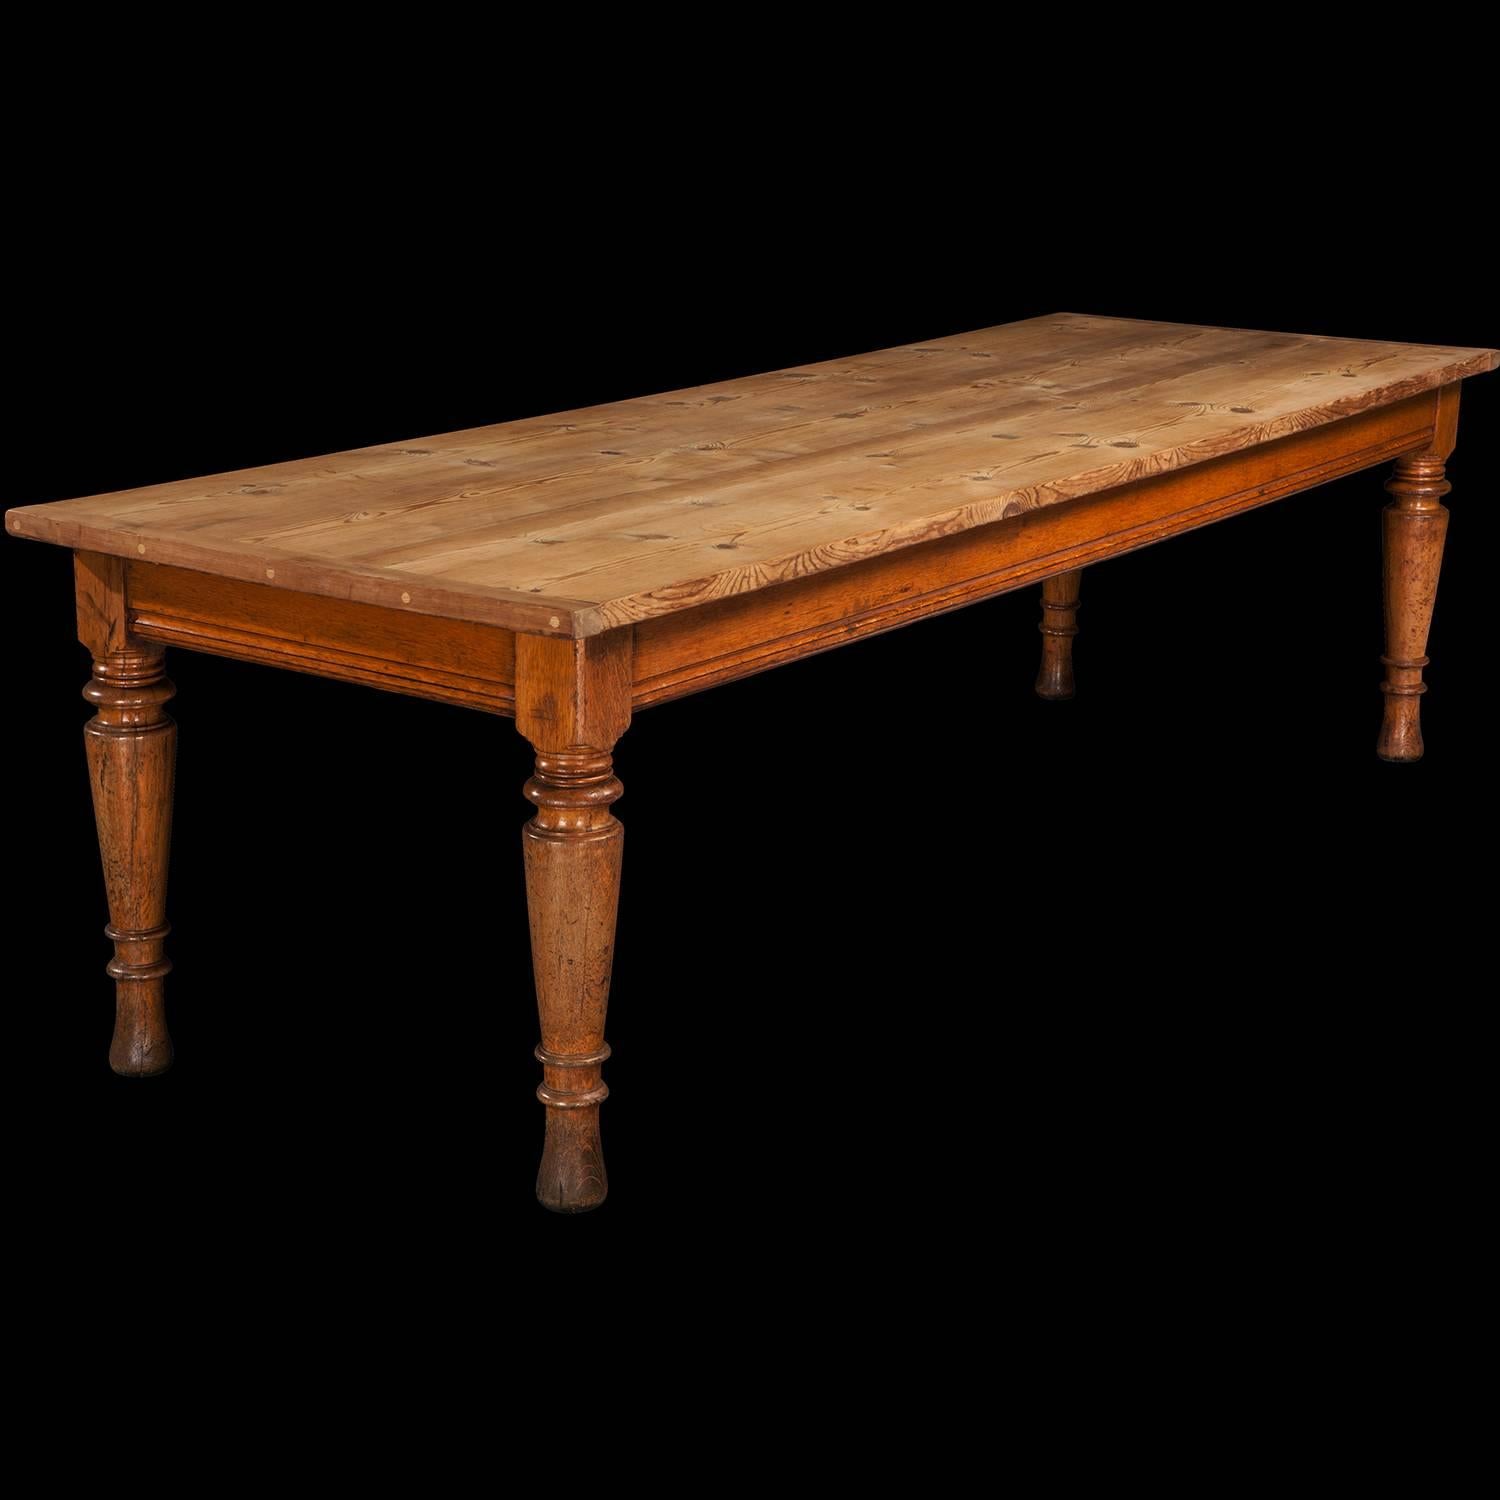 Scrubbed pine top with decorative square lozenges set into the top in the centre. Solid oak base with turned legs.